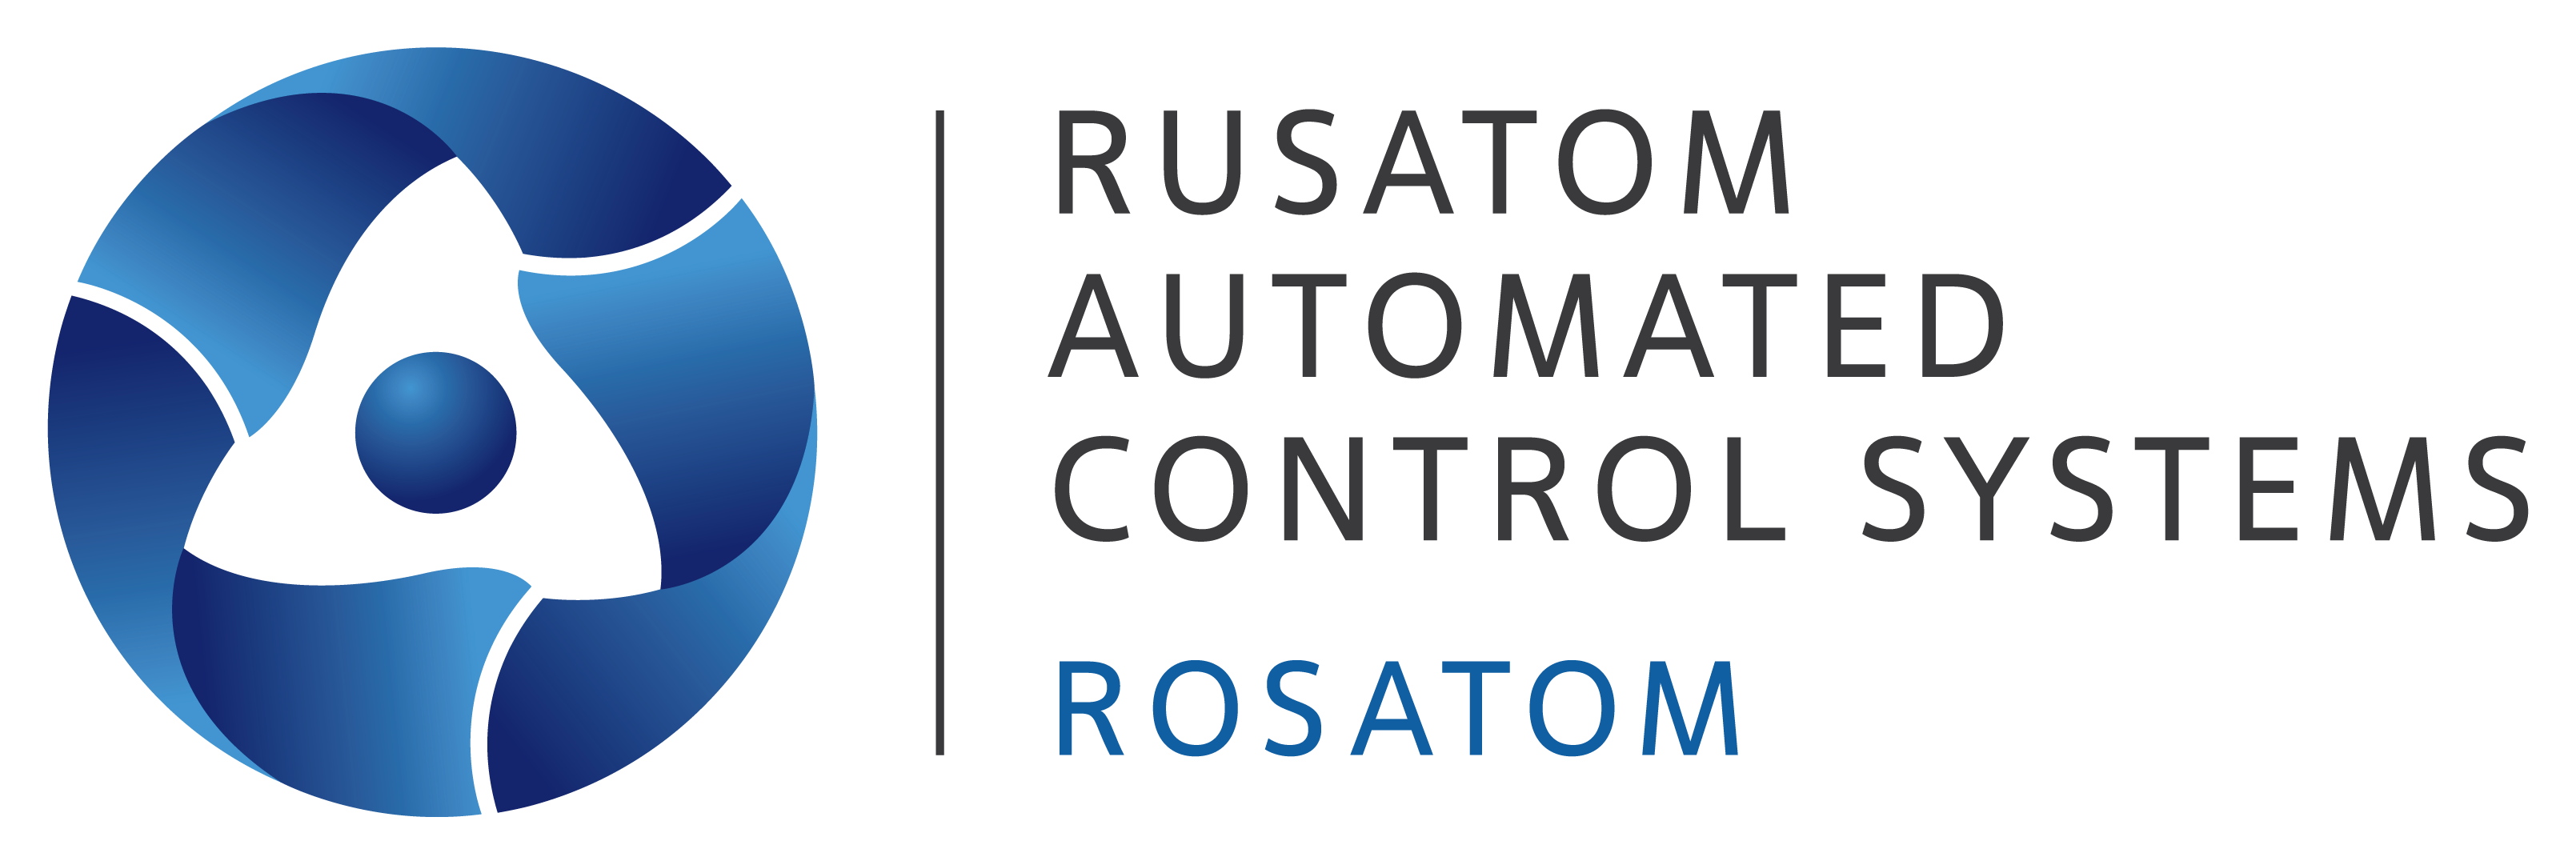 RUSATOM AUTOMATED CONTROL SYSTEMS